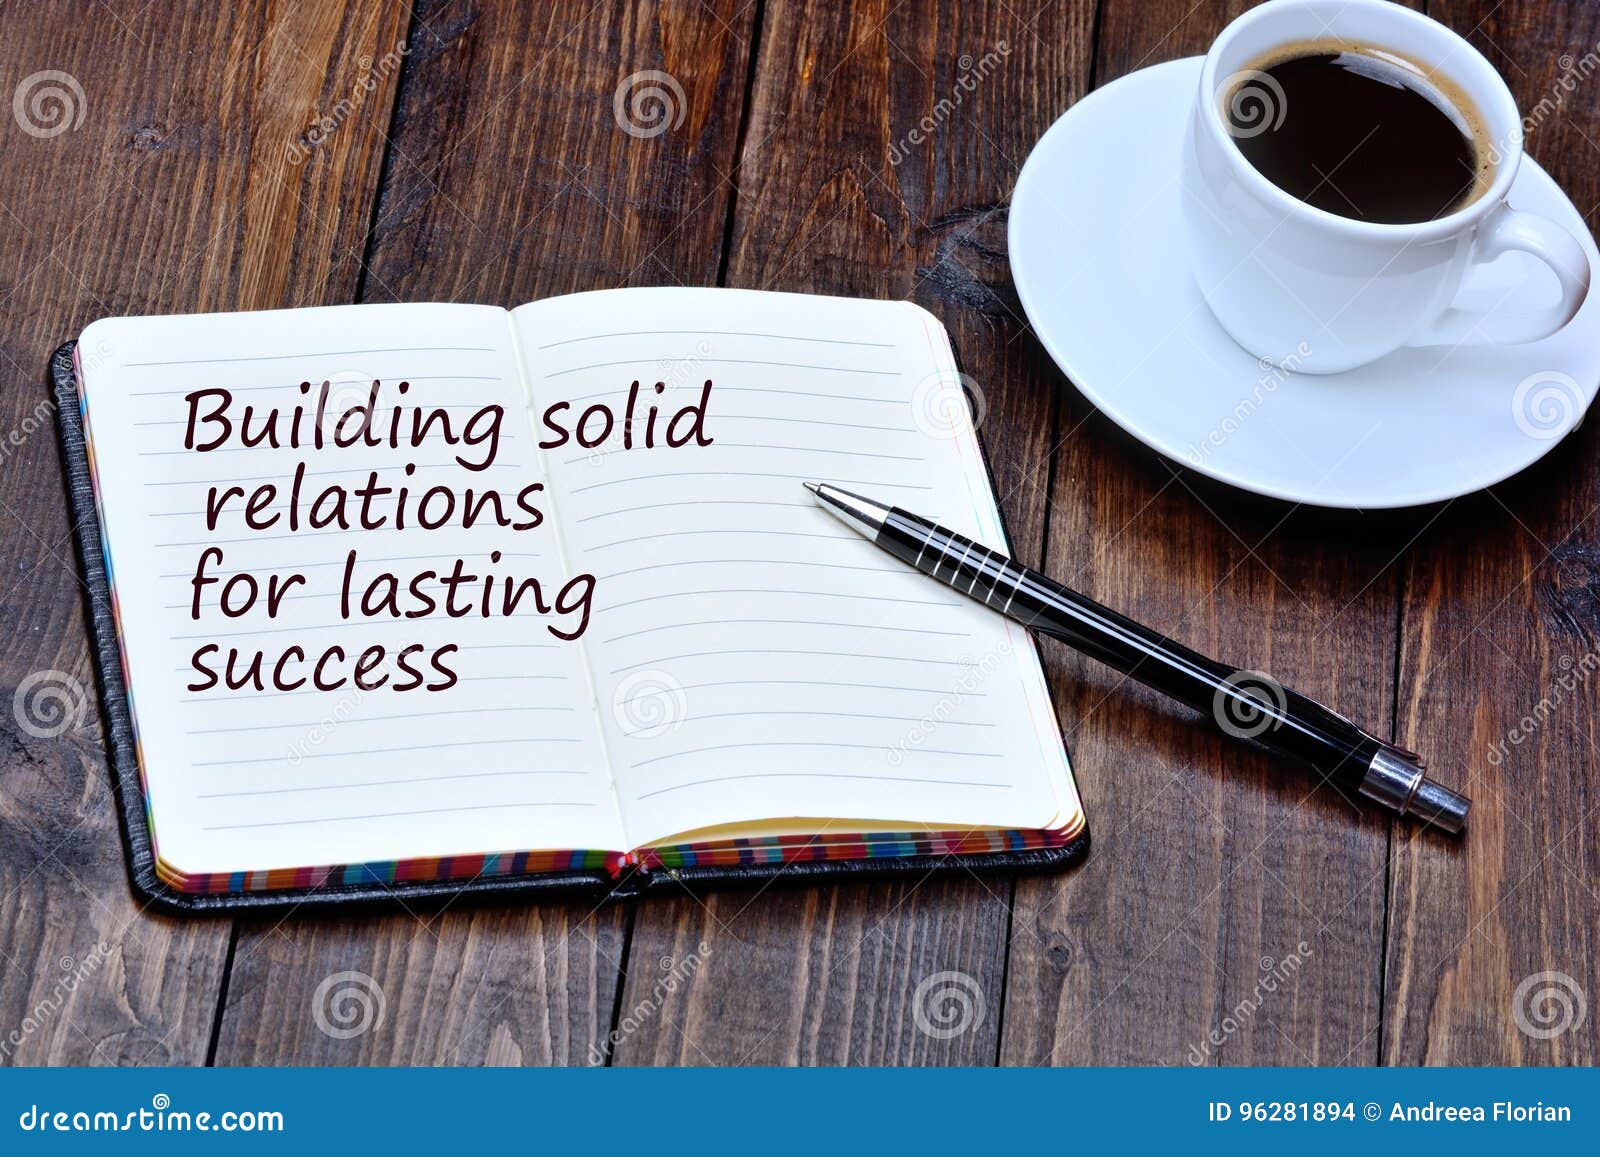 building solid relations for lasting success on notebook